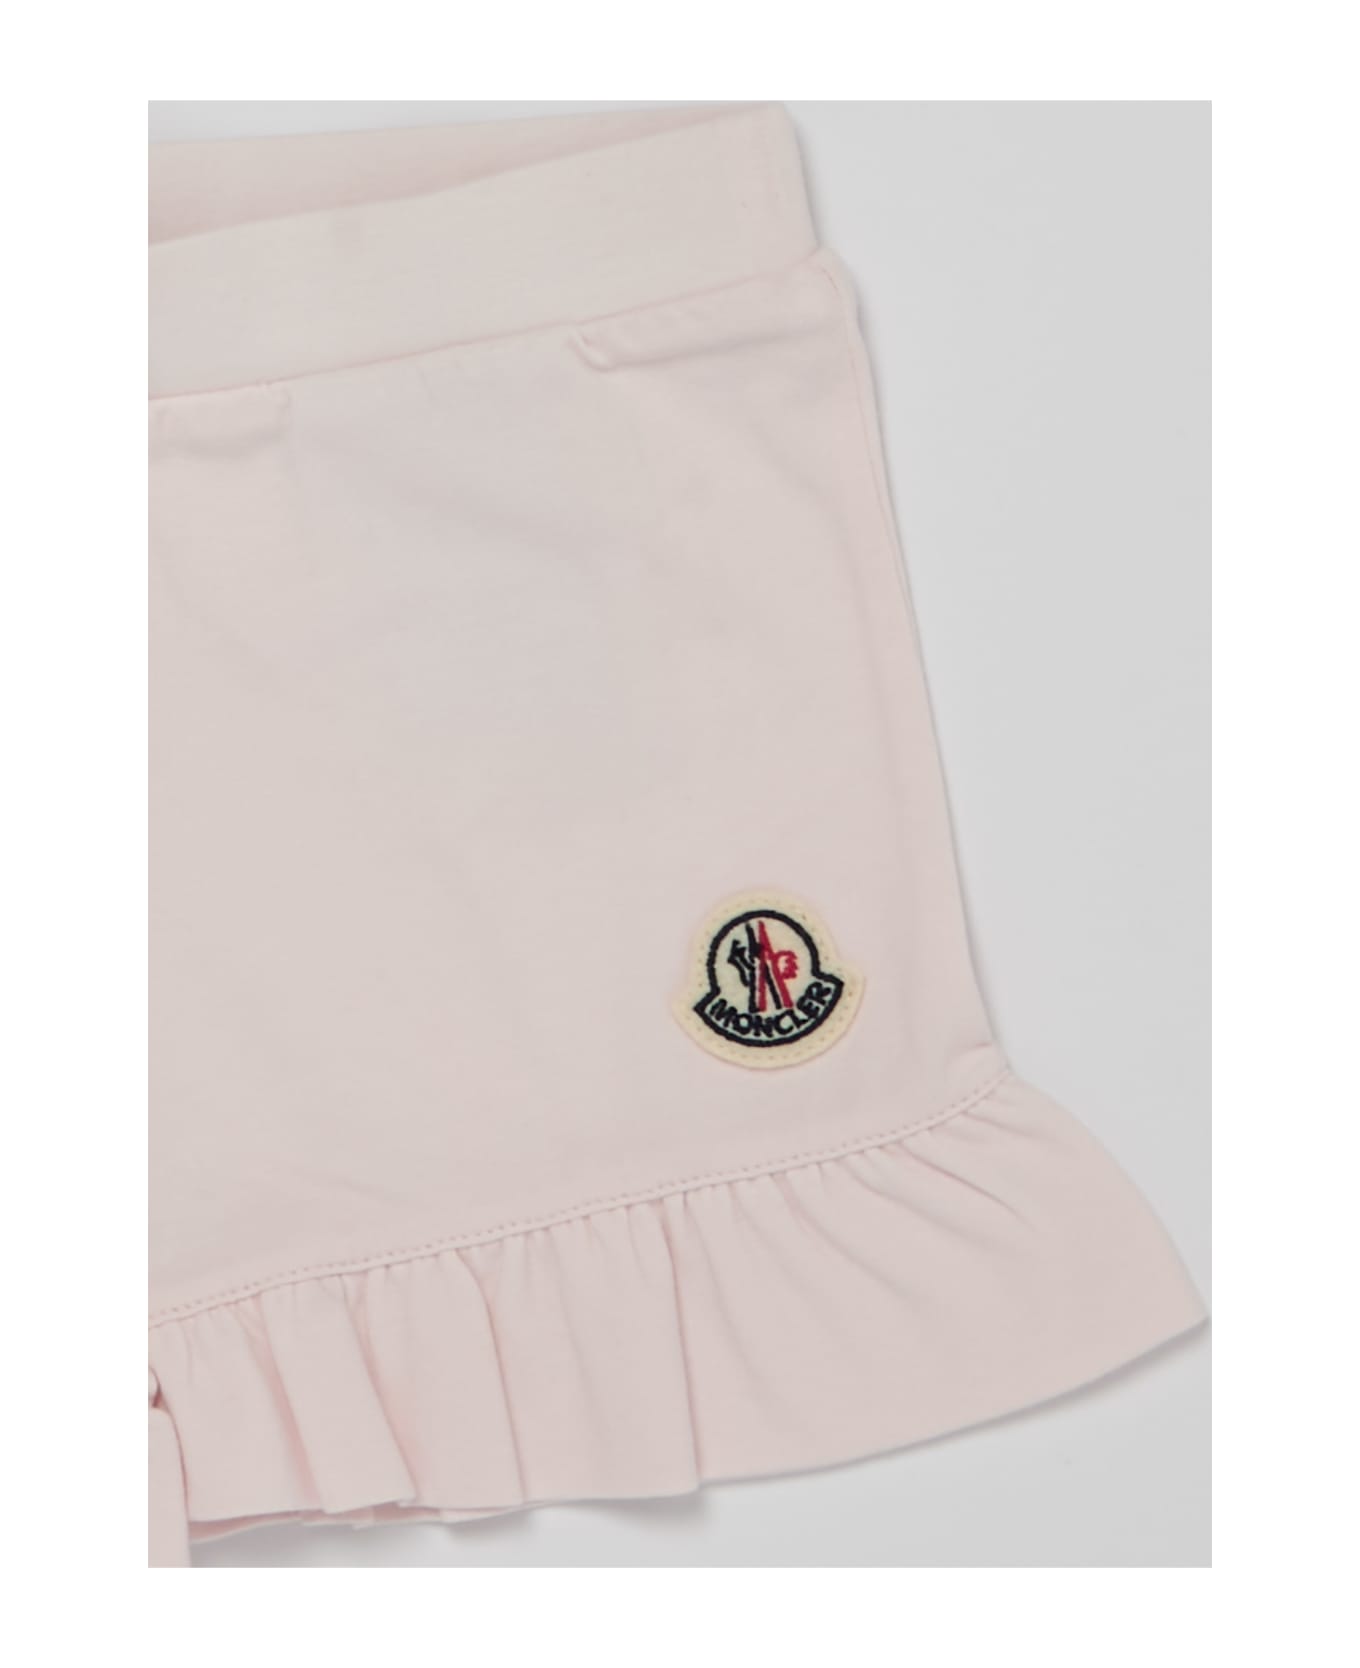 Moncler Top+shorts Suit - ROSA ボディスーツ＆セットアップ